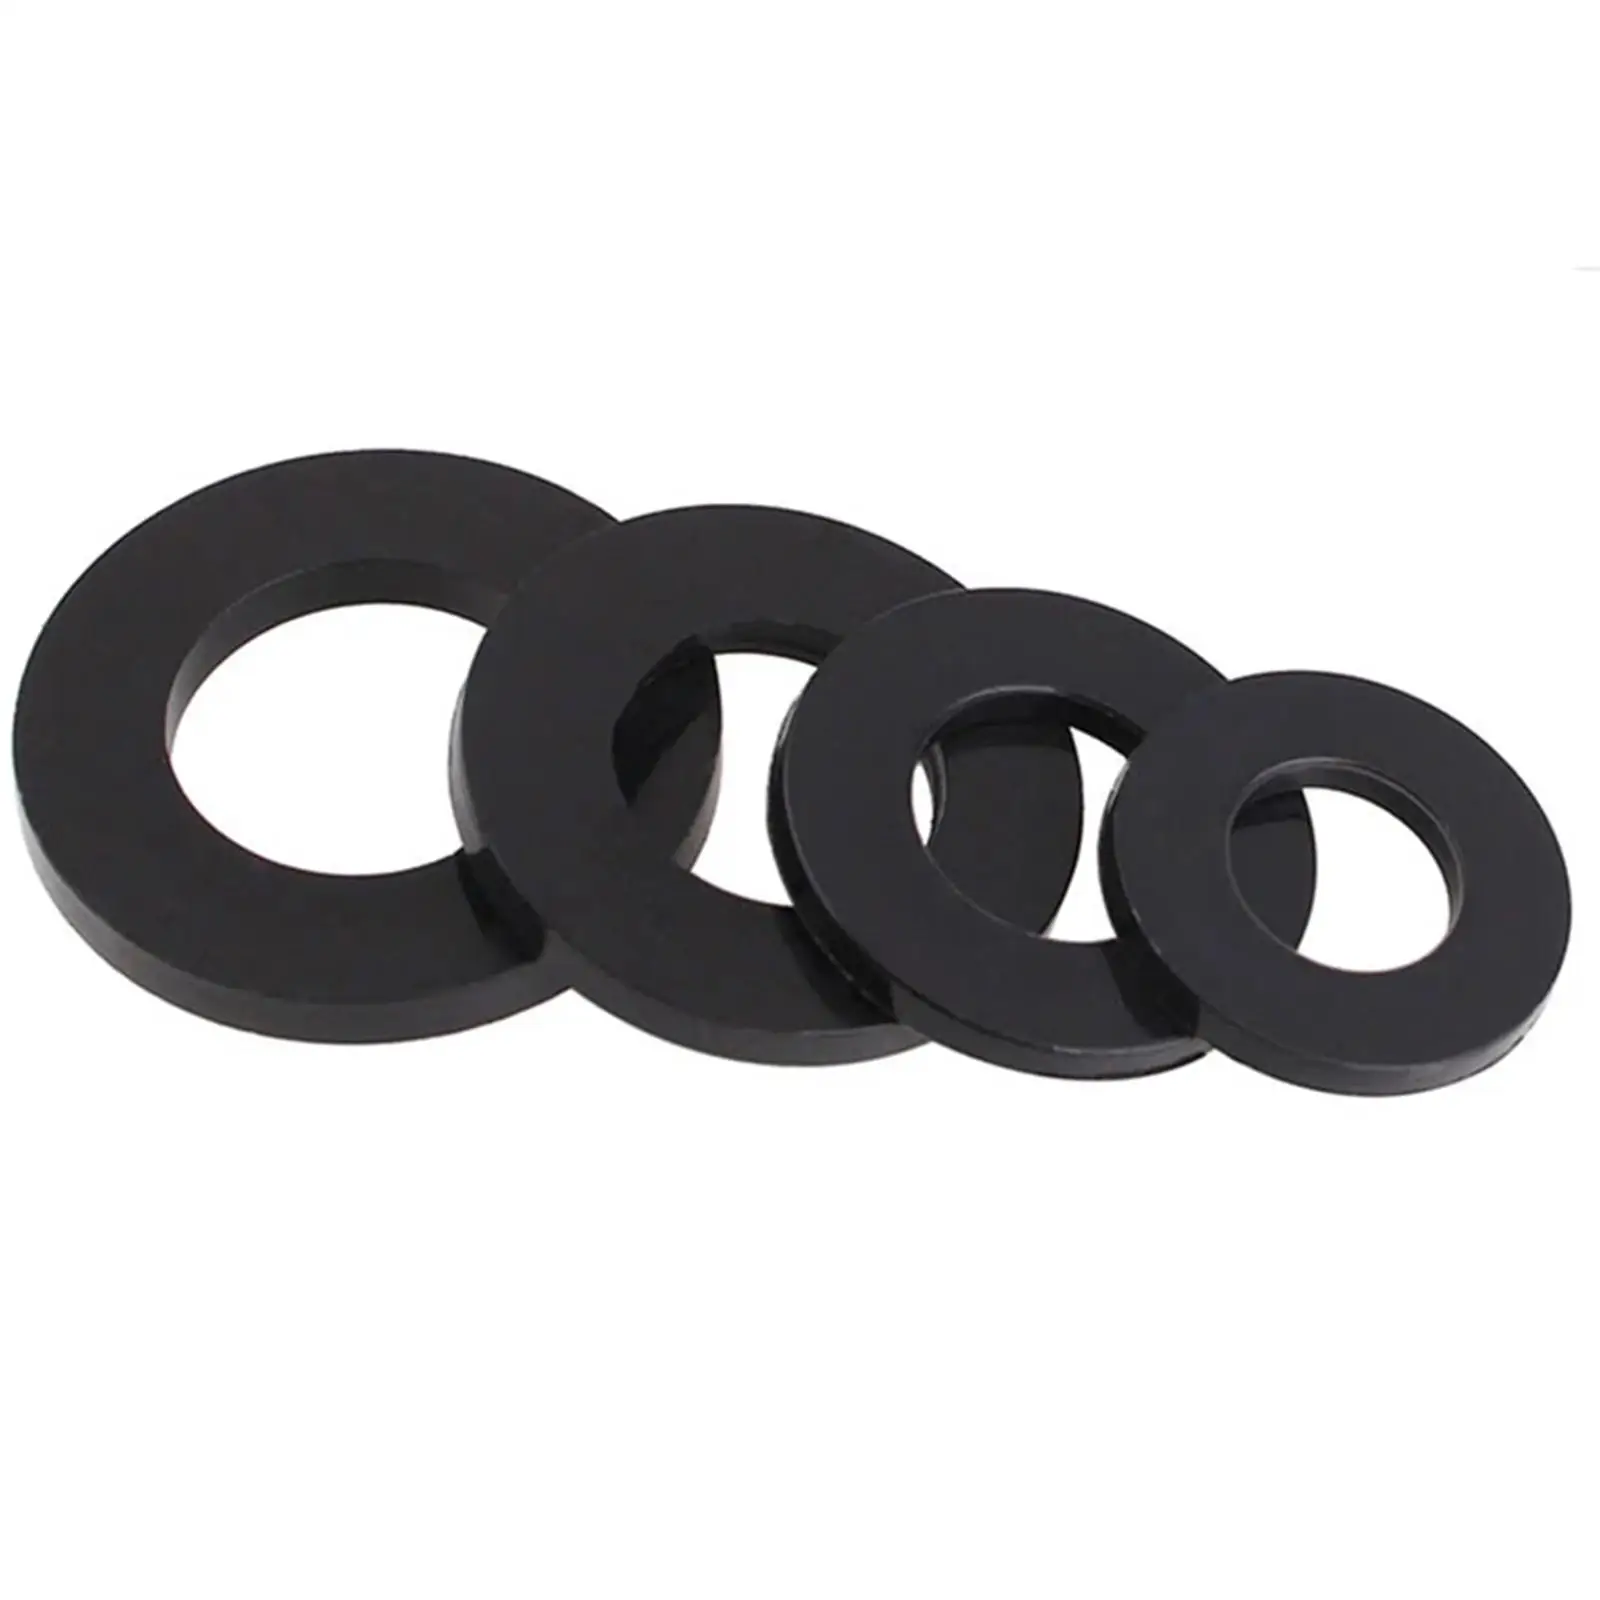 500 Pieces Washer Spacers M2 to M10 flat Seal 8 Sizes with Box Assorted Flat Washers Set for Household Commerical Use